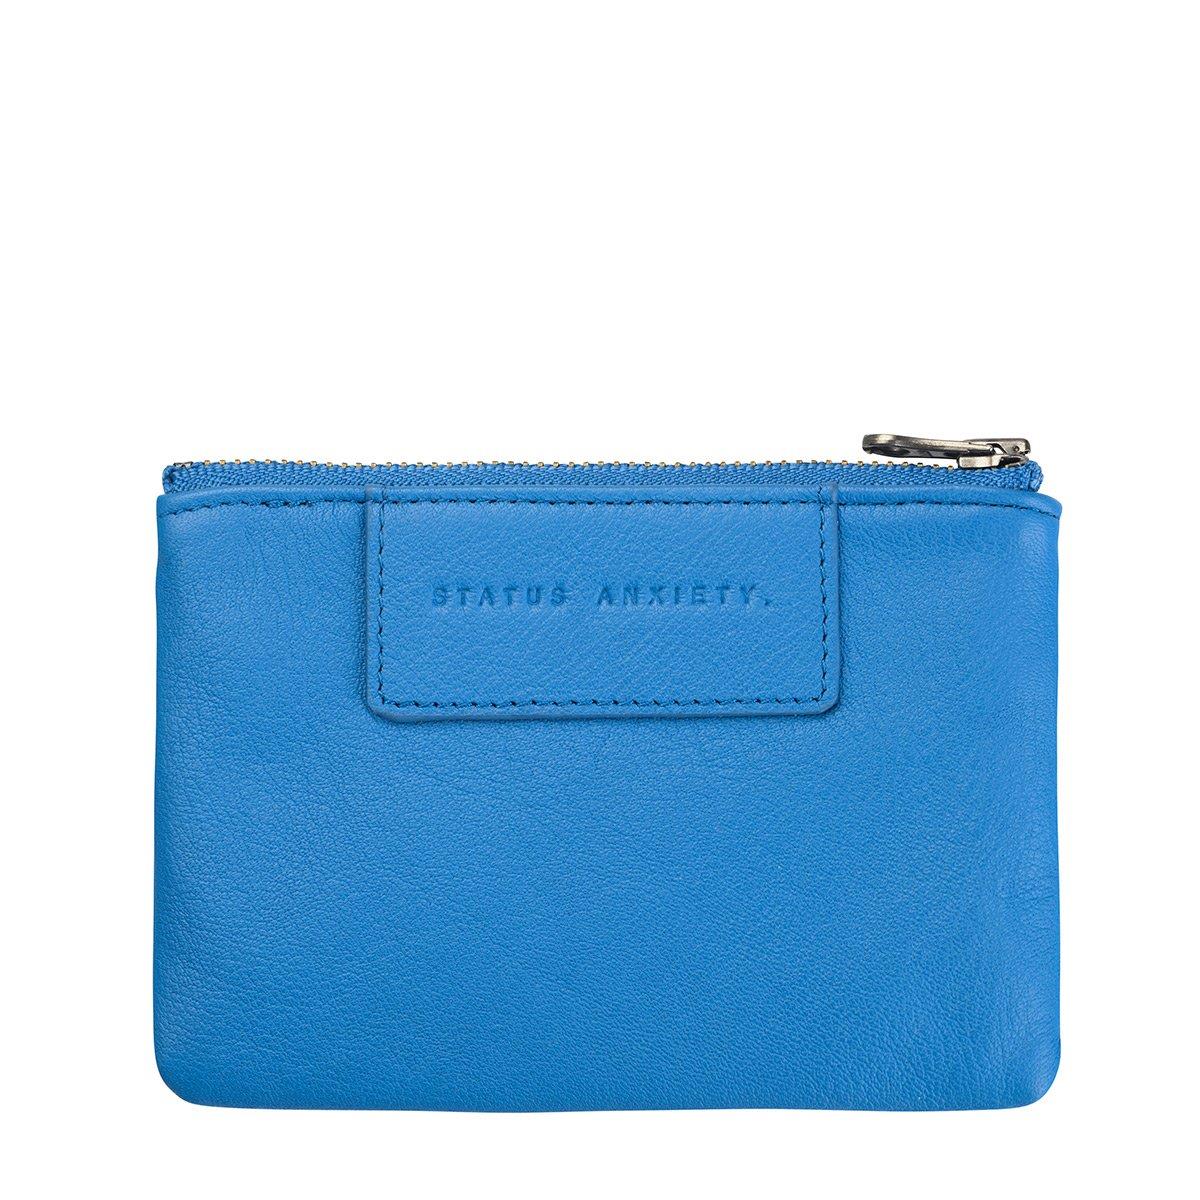 Good Neighbour | Status Anxiety Anarchy Zip Wallet (Surf Blue)